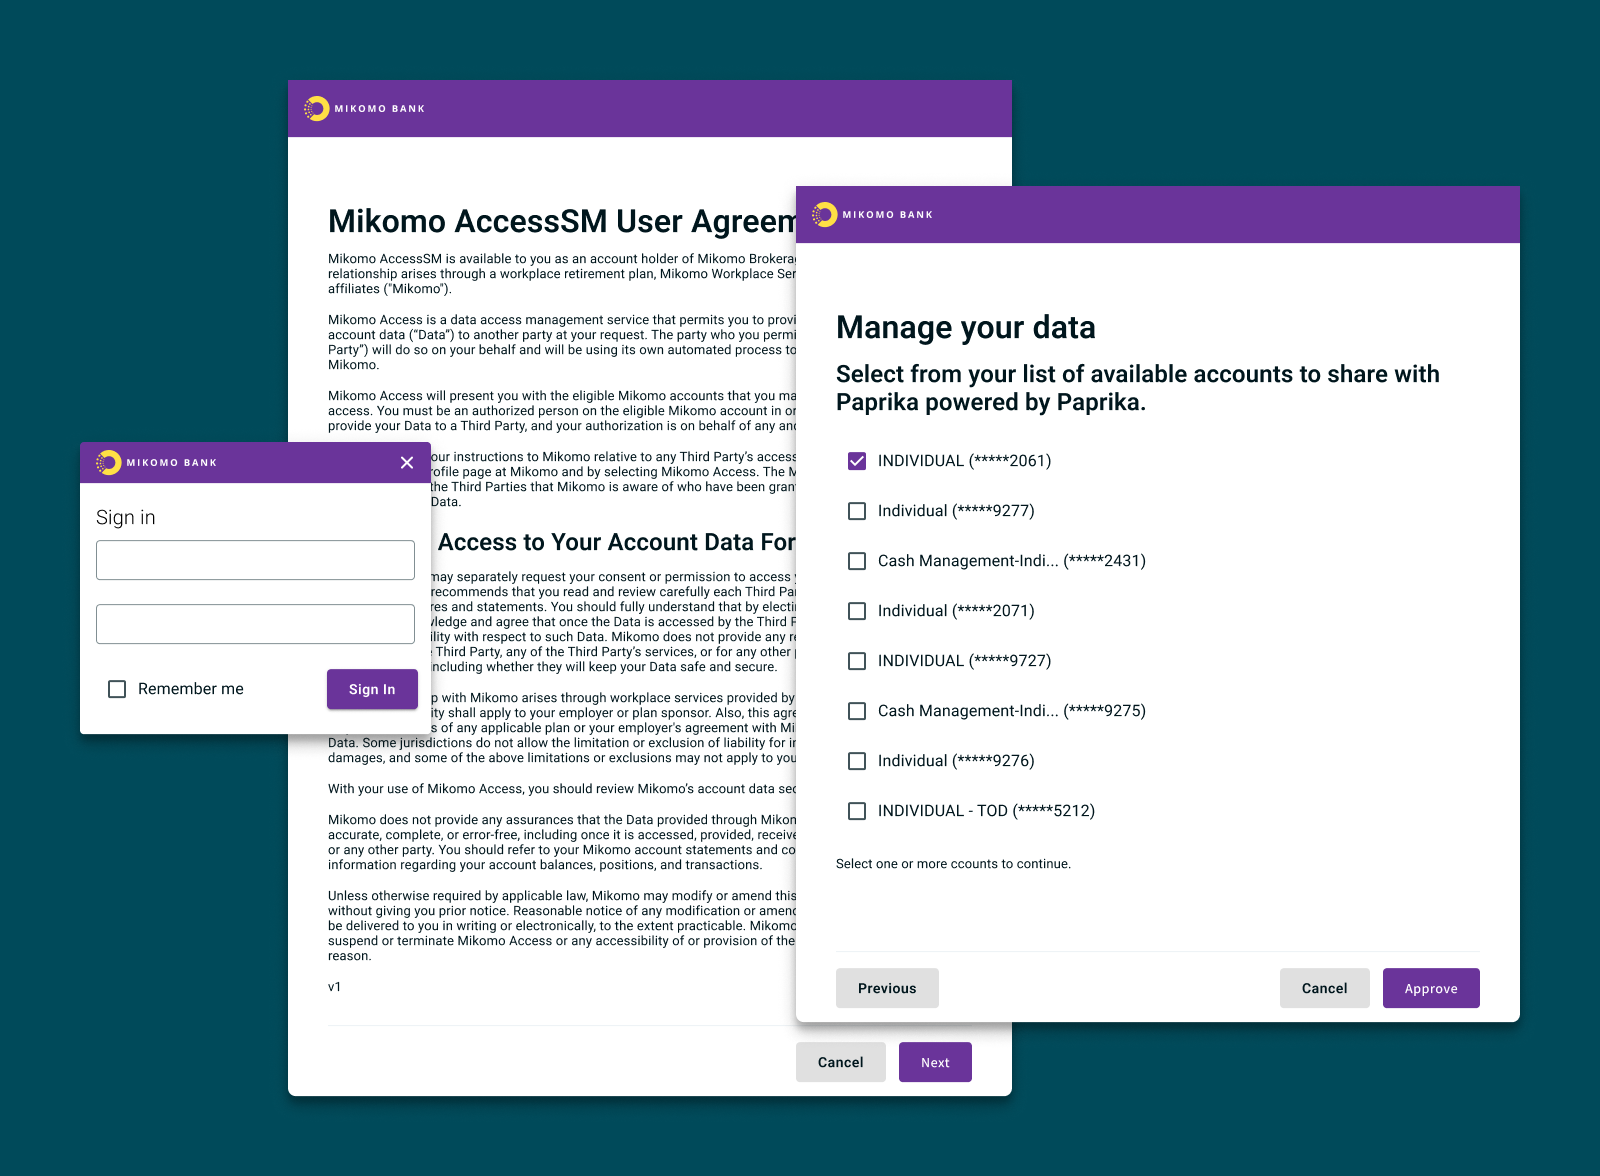 Sign in, accept the user agreement, and select which accounts to share